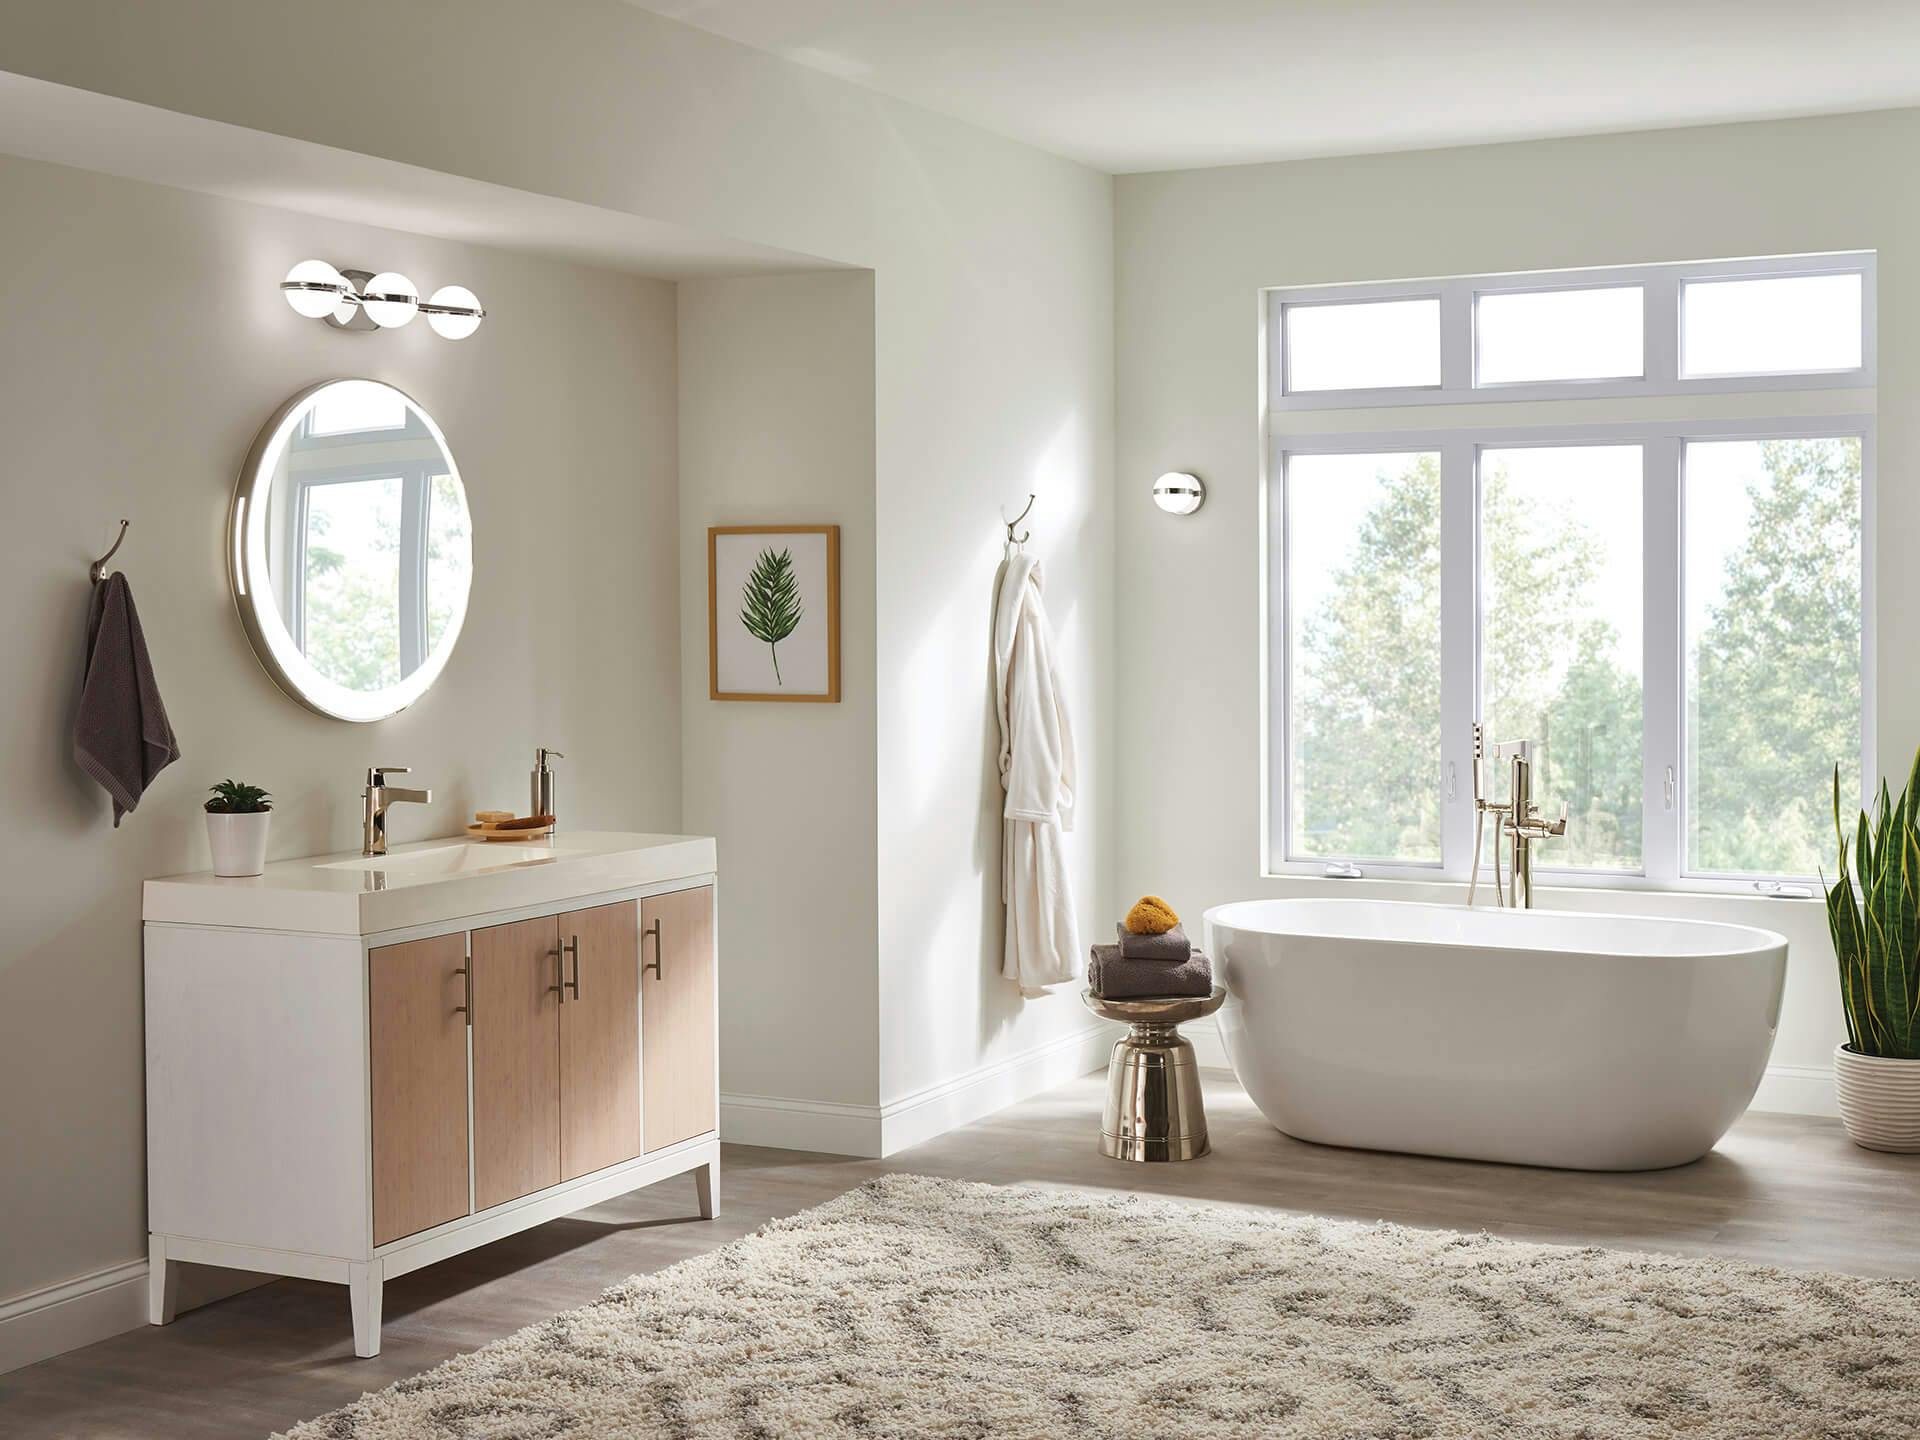 A spacious bathroom with large windows pouring in sunlight featuring Brettin vanity lights above a round mirror